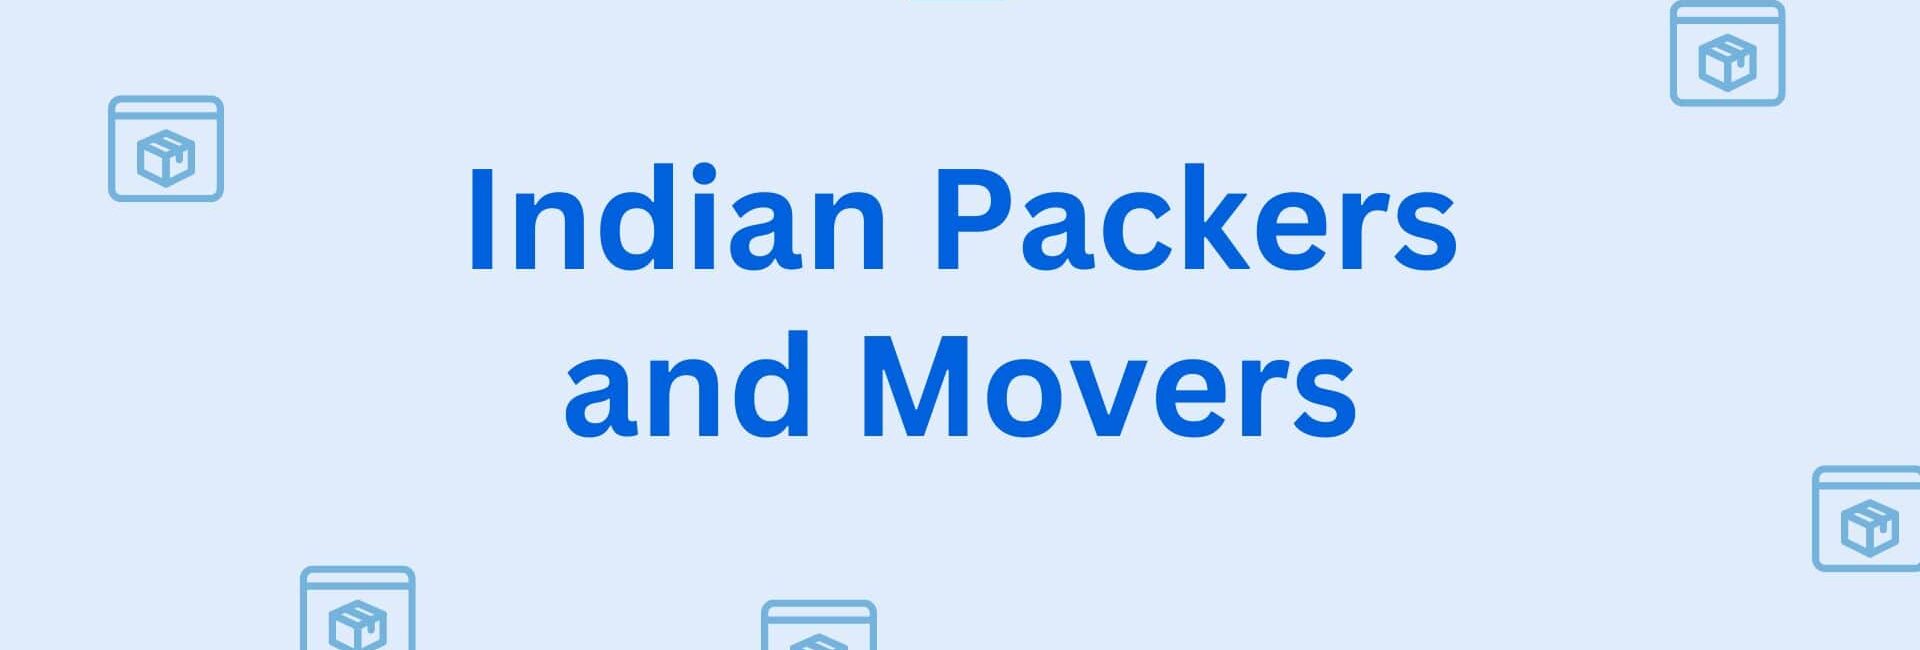 Indian Packers and Movers - Packers and Movers in Hisar